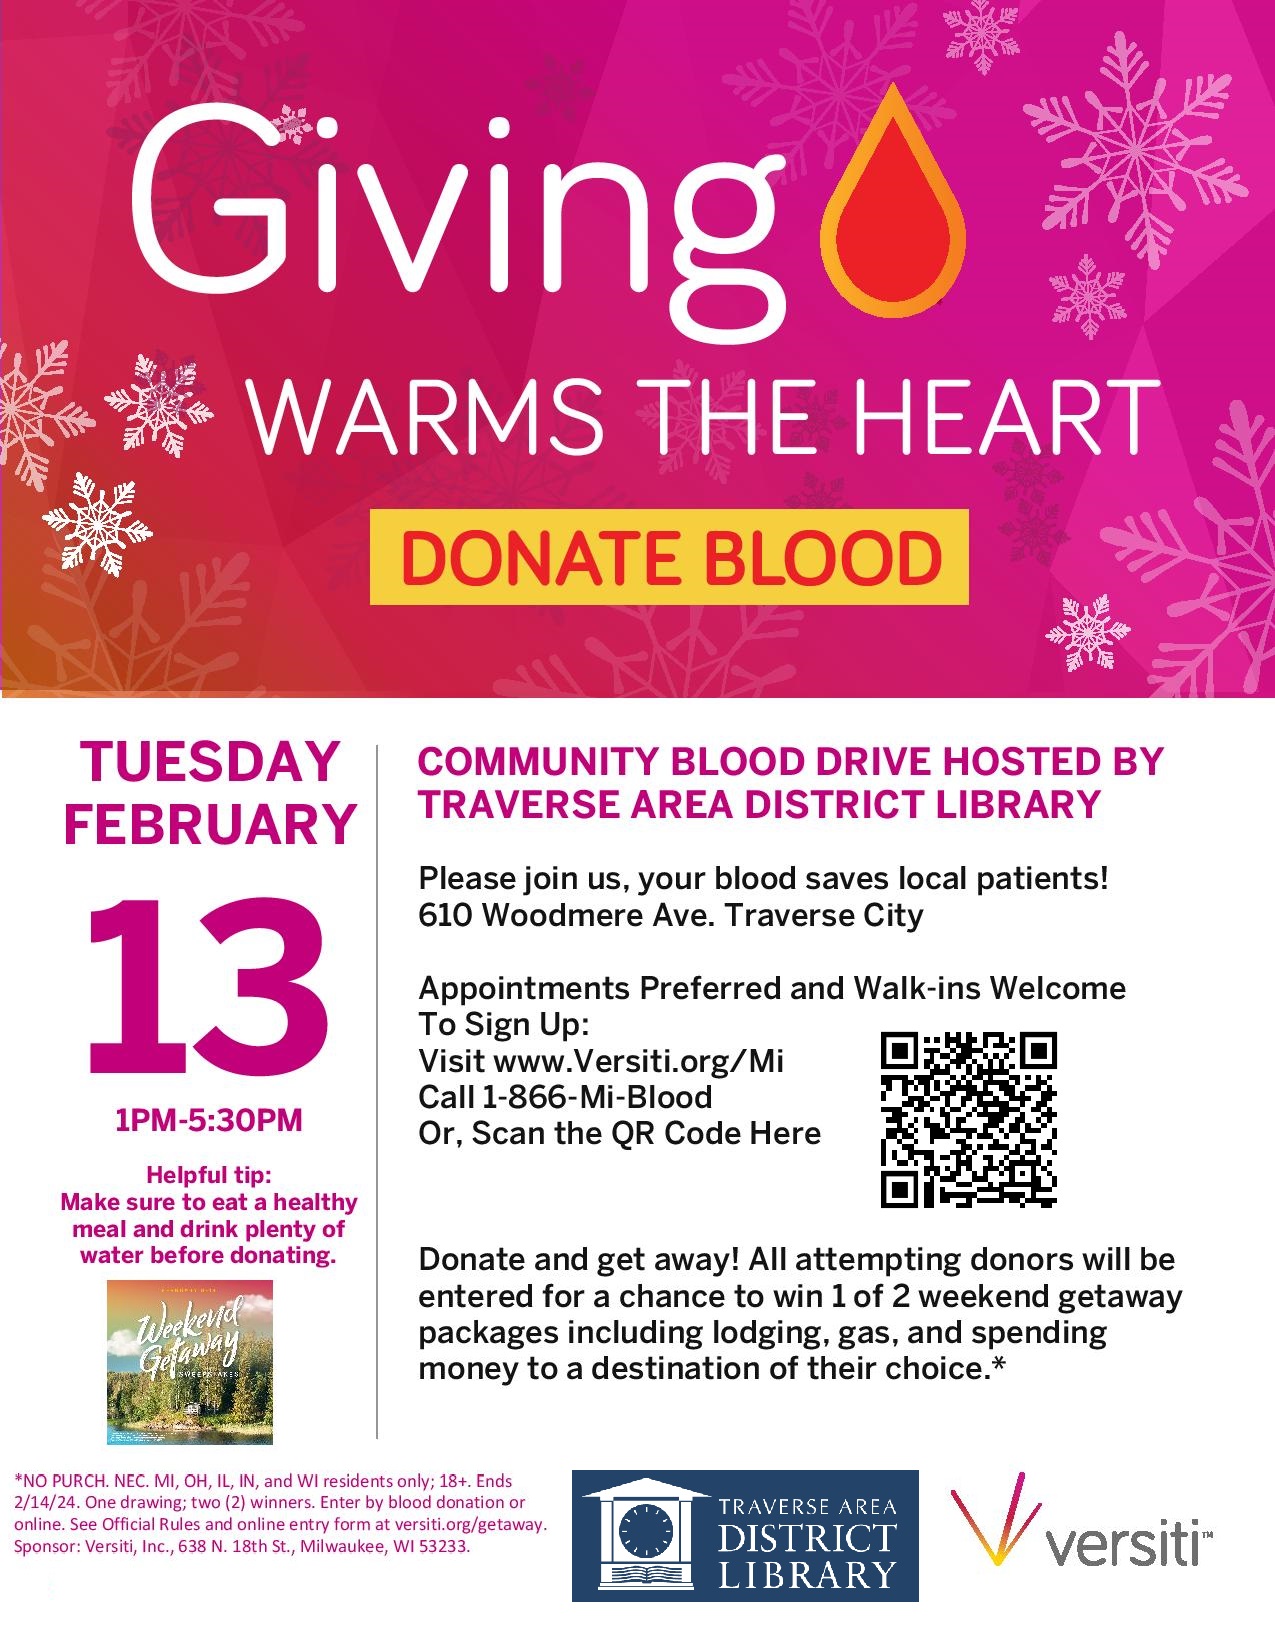 Banner: Giving Warms the Heart, Donate Blood